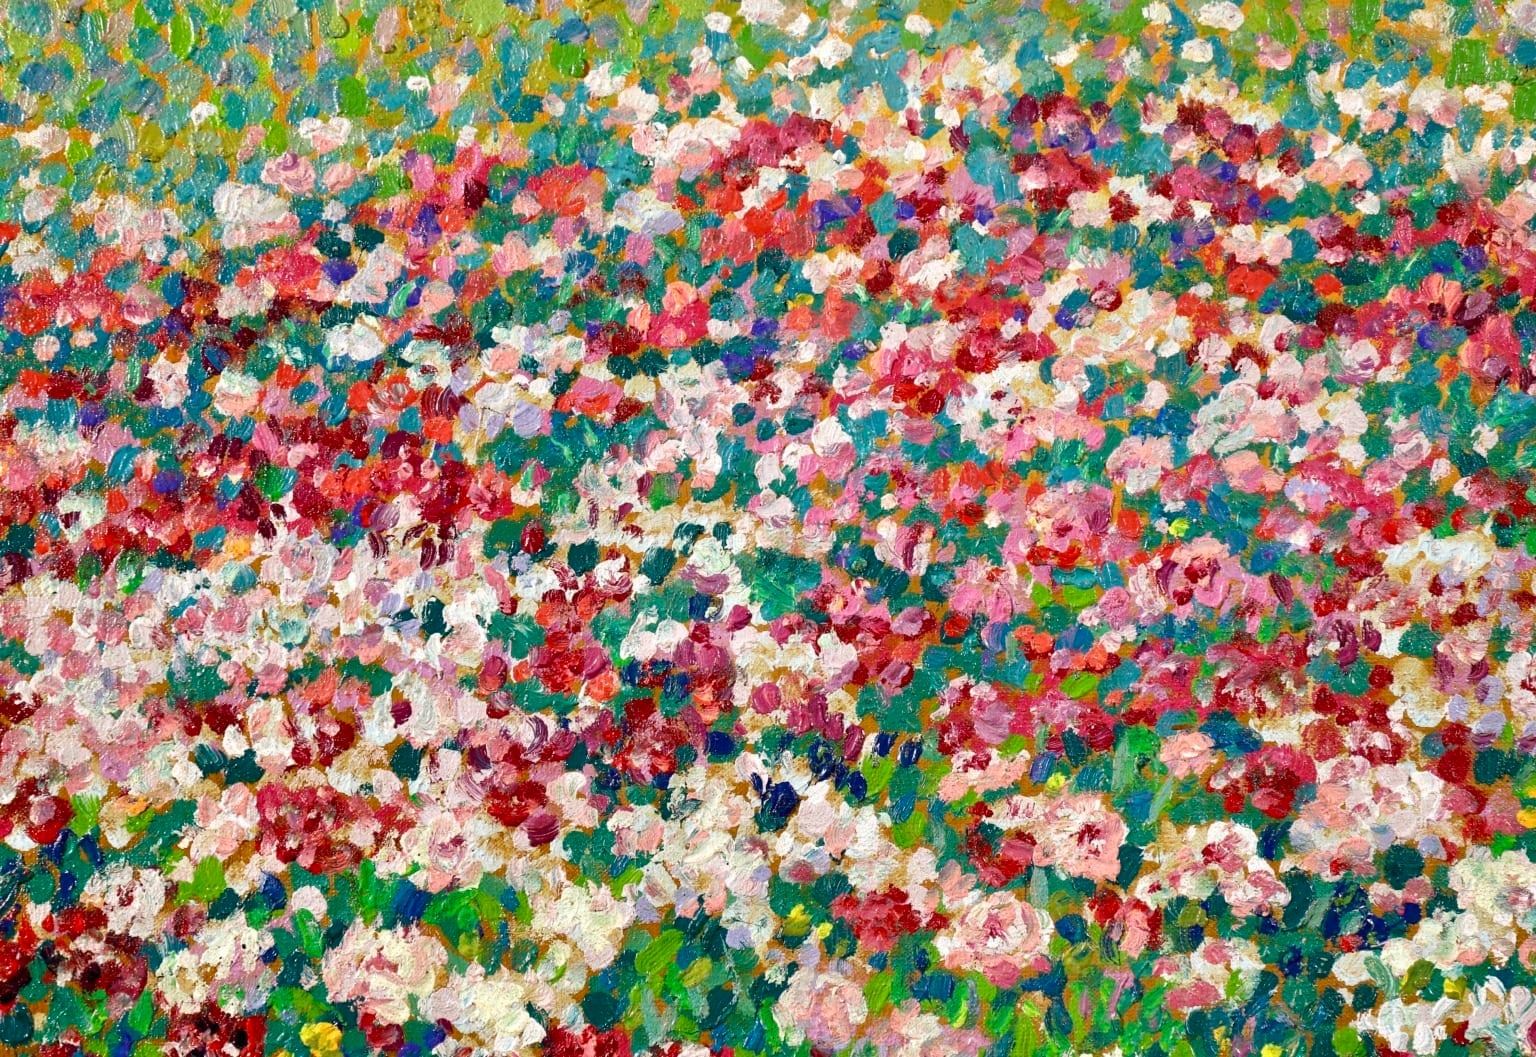 Field of Flowers - Post Impressionist Oil, Landscape Oil by J Martin-Ferrieres 2